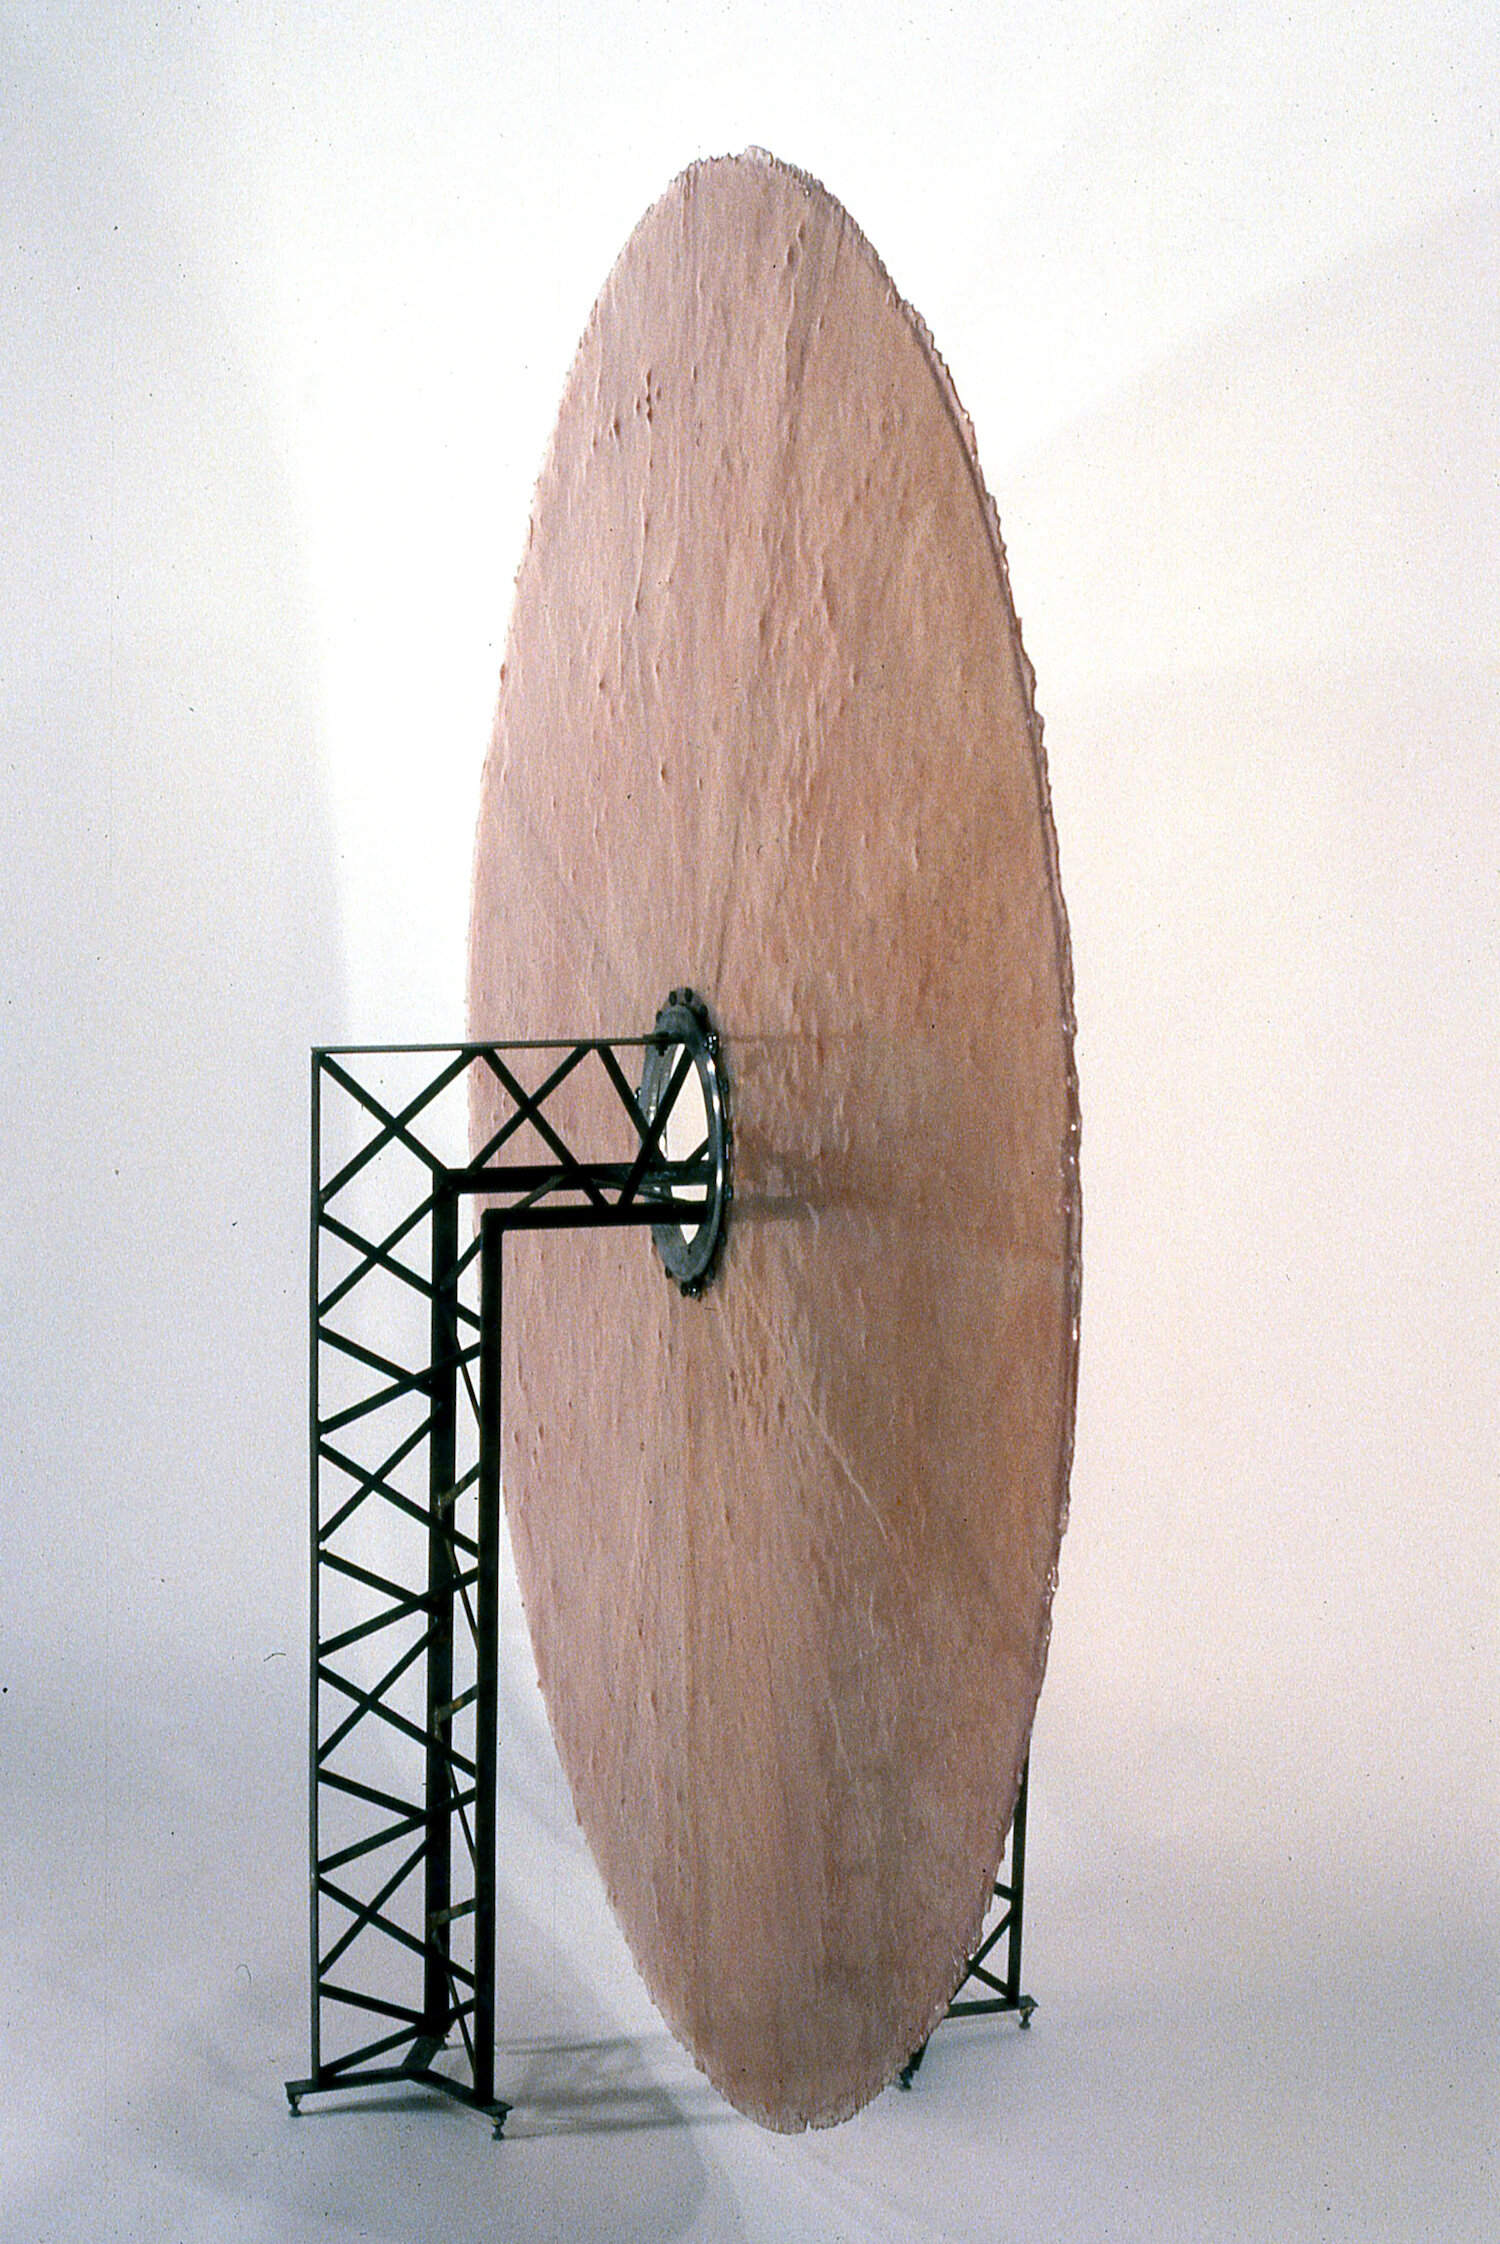  Big Wheel (1997), polyester resin, steel, 74 x 74 x 29 in  (1.8 x 1.8 x .73 m)   ‘Big Wheel  also reflects Butter’s Interest in childhood play. A large, thin disc of translucent pink fiberglass is mounted on an axle supported by armatures; just over